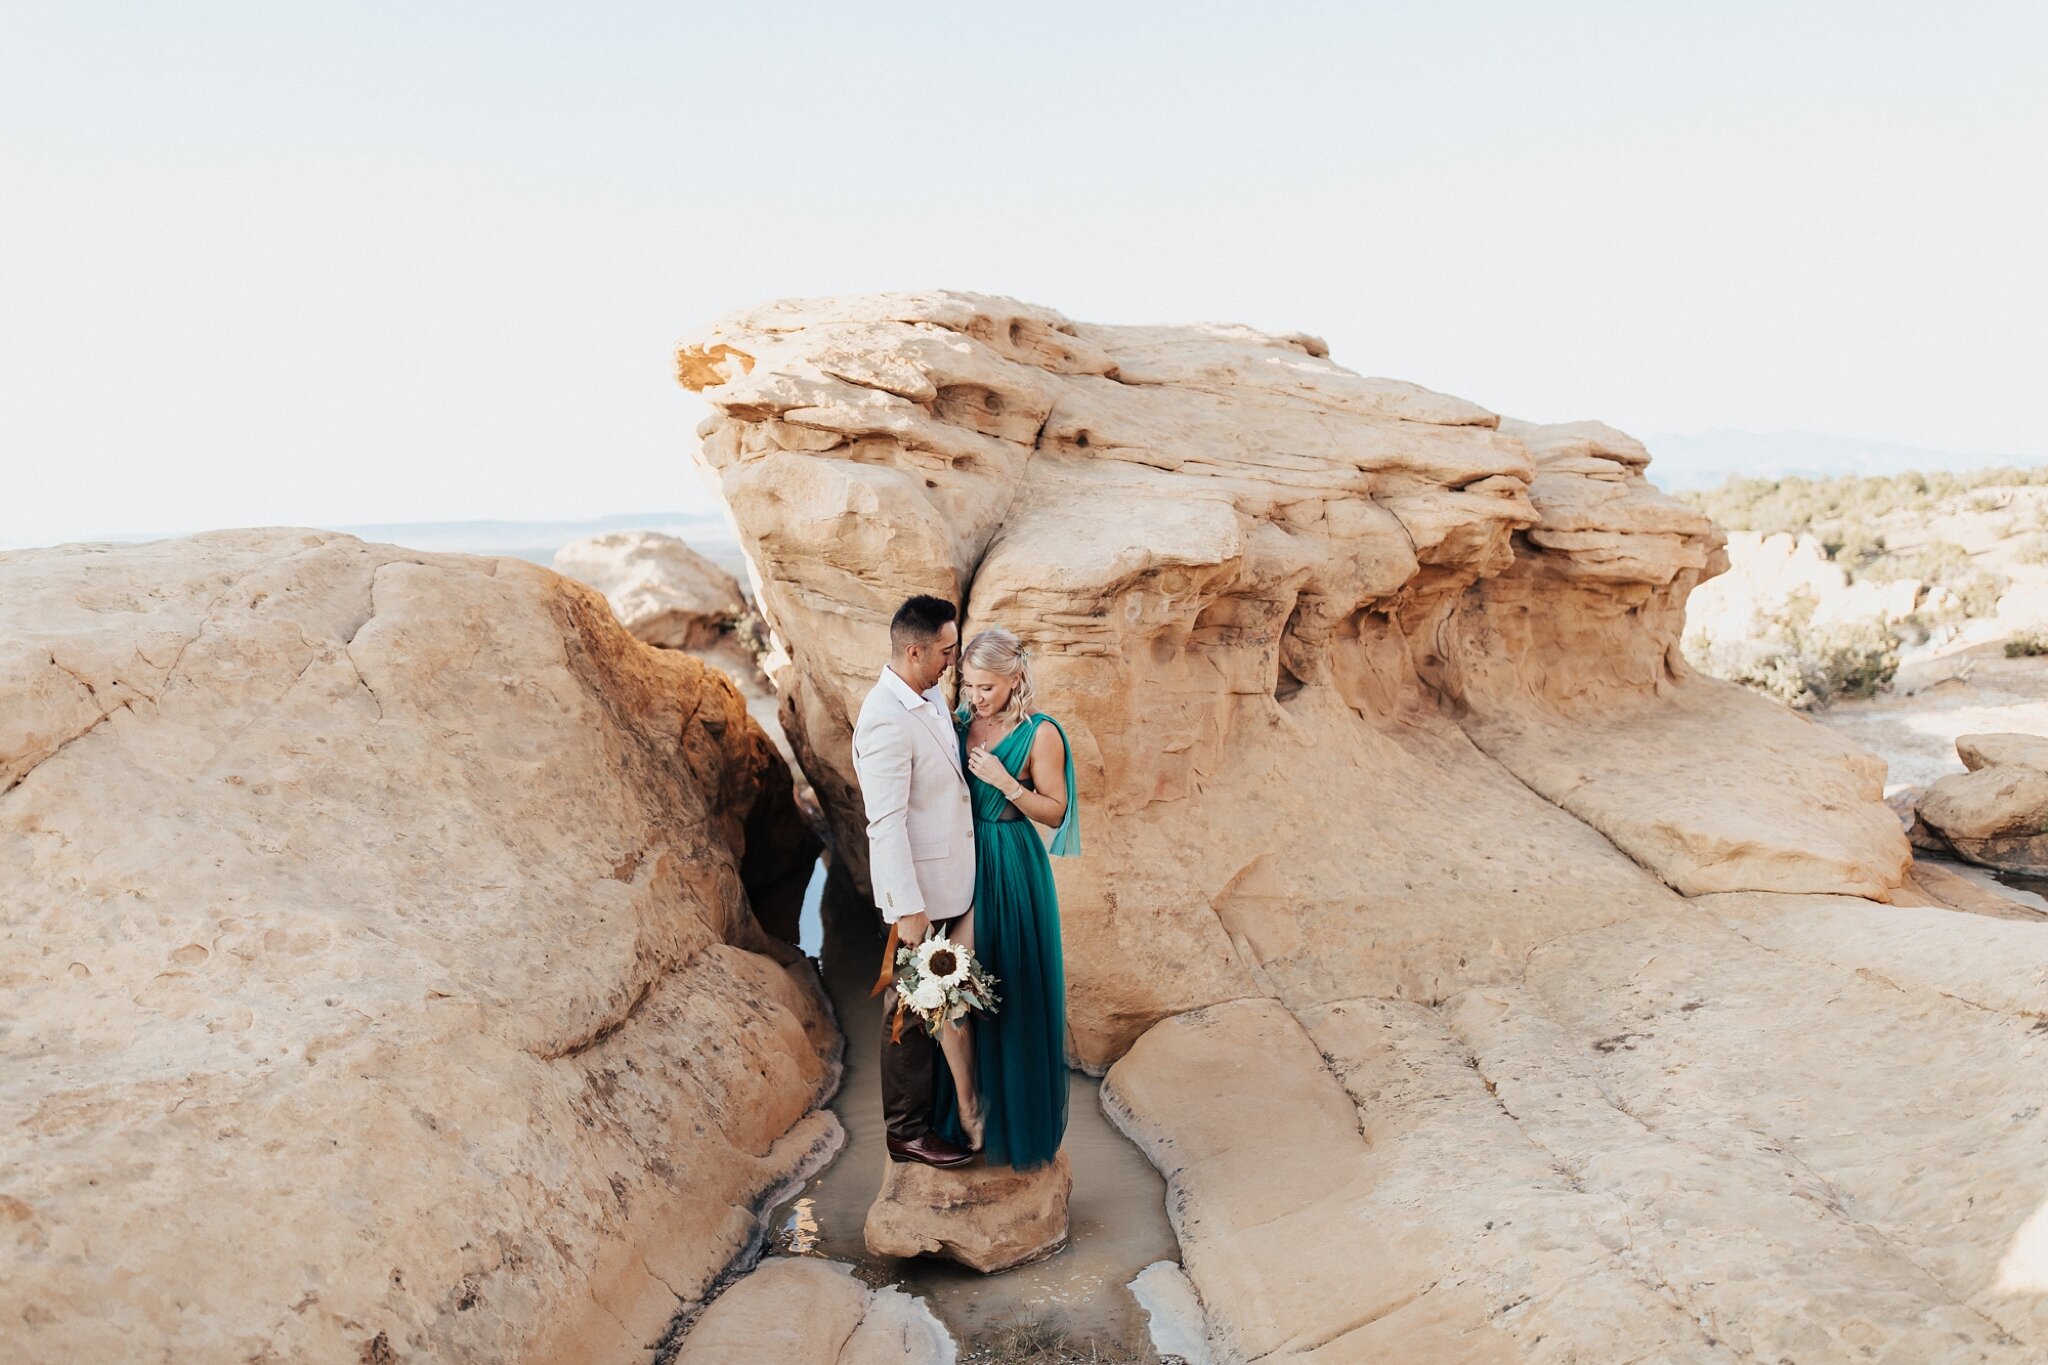 Alicia+lucia+photography+-+albuquerque+wedding+photographer+-+santa+fe+wedding+photography+-+new+mexico+wedding+photographer+-+new+mexico+wedding+-+anniversary+-+styled+anniversary+-+elopement+-+styled+elopement_0010.jpg